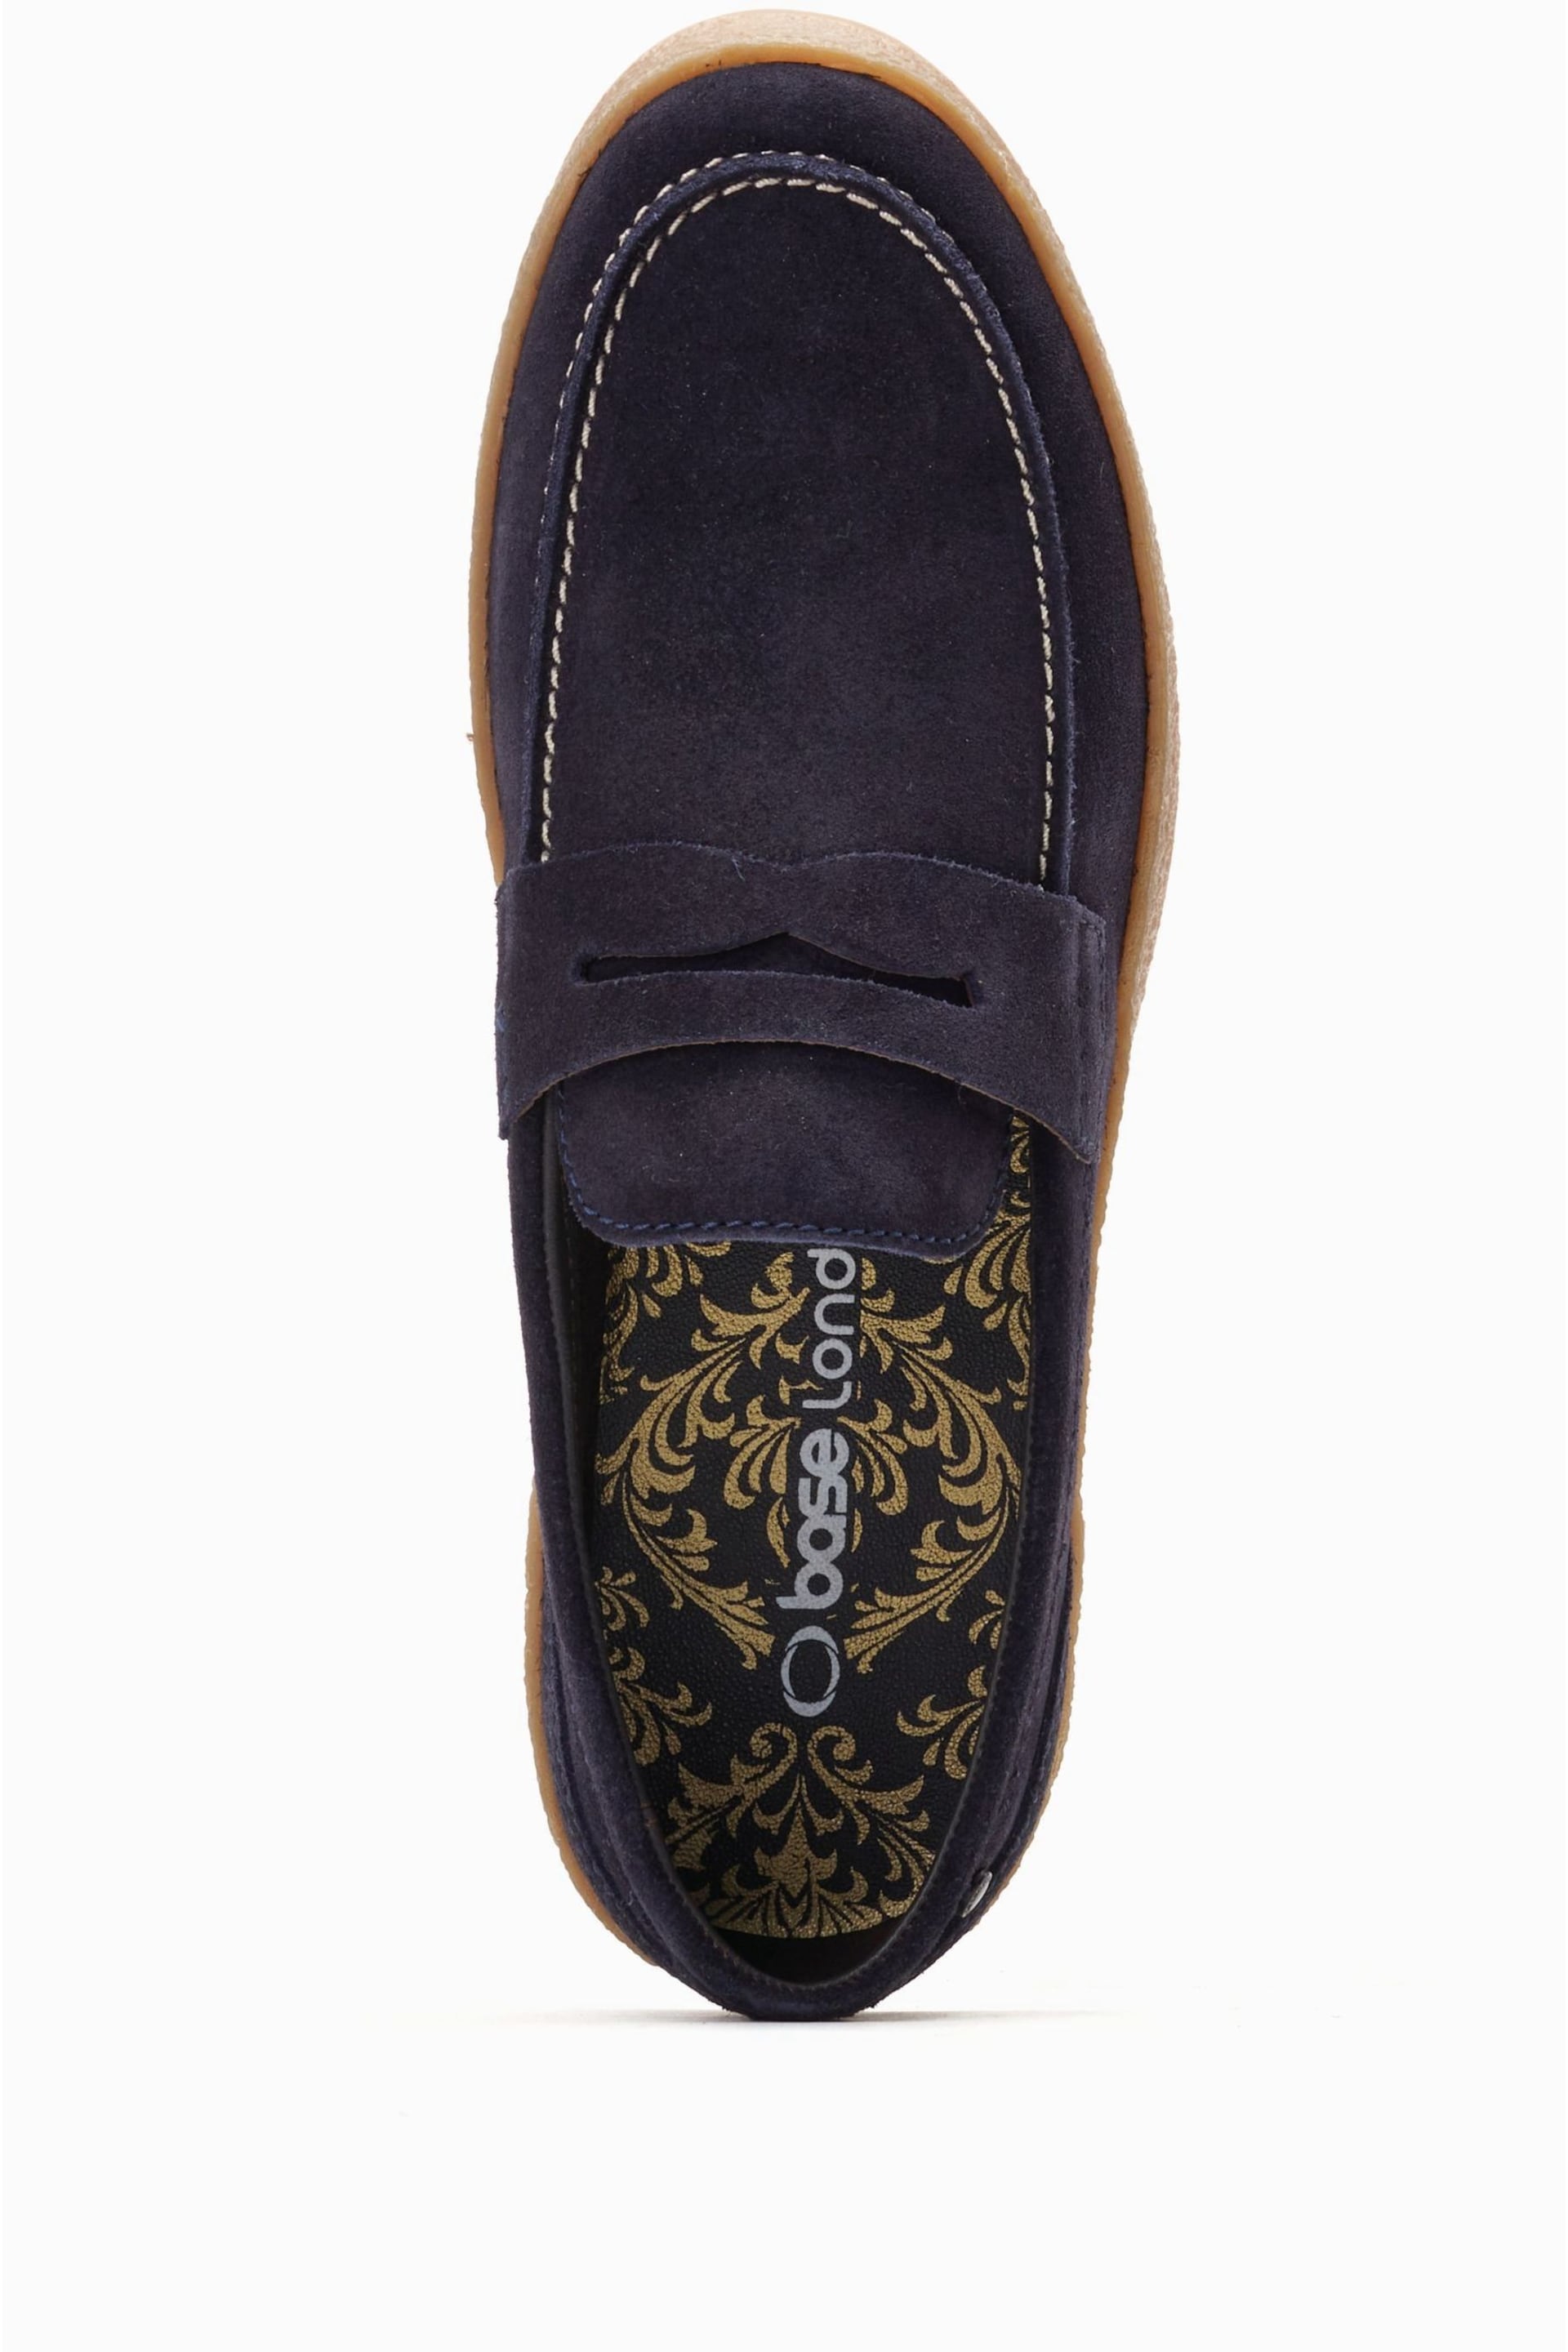 Base London Claude Slip On Penny Loafers - Image 4 of 6